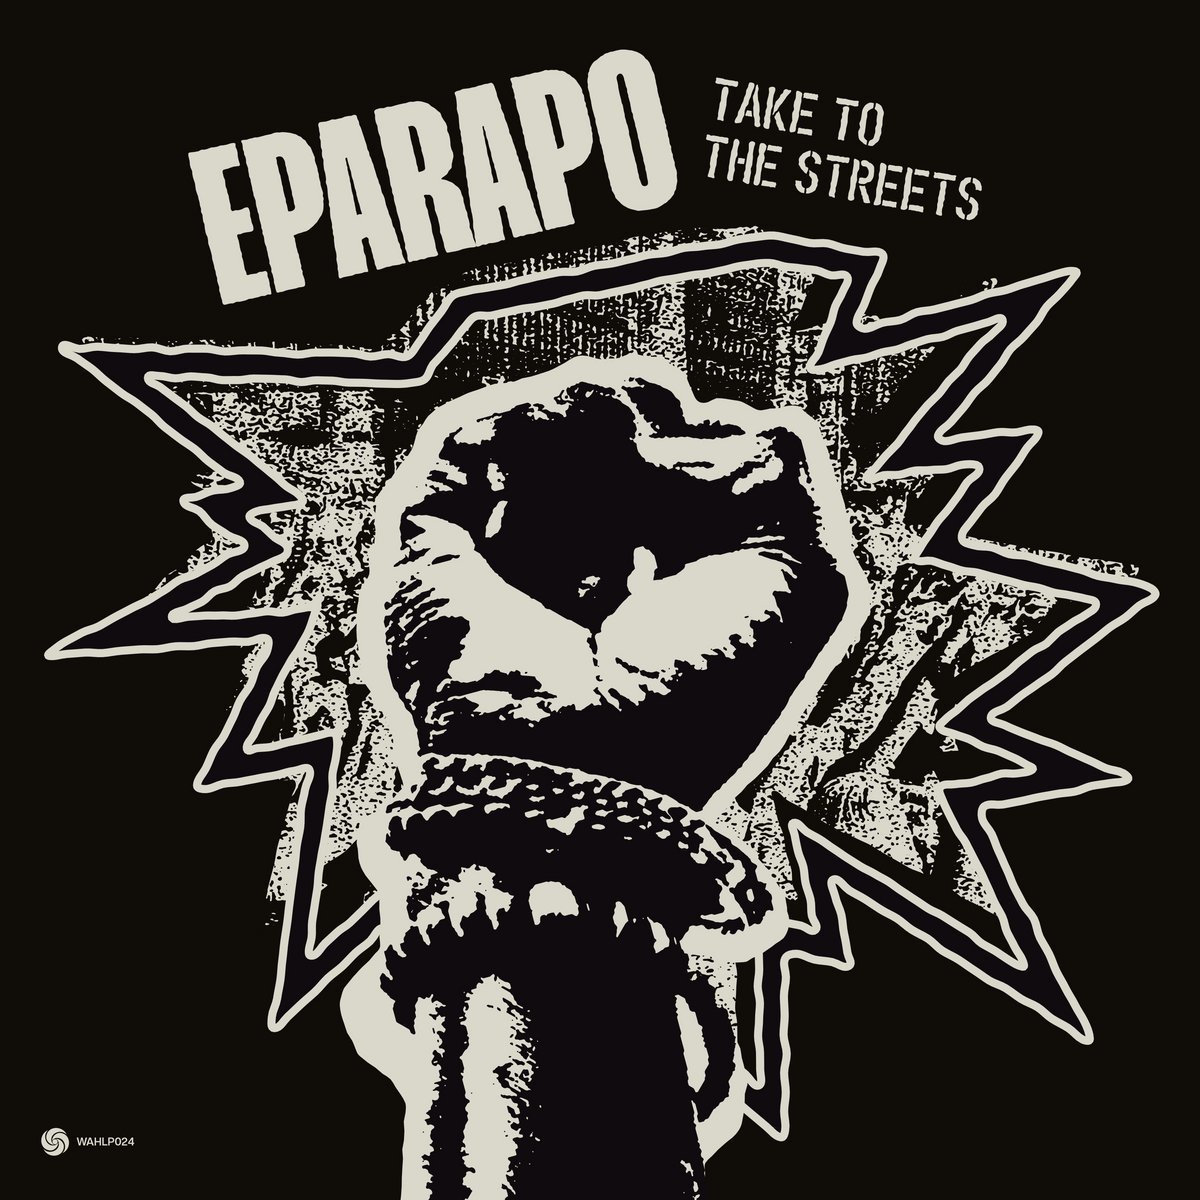 Eparapo - Take to The Streets
«The word “eparapo” means “join forces” in Yoruba. (...) a time of lockdowns & government scandals. (...) recorded against a backdrop of societal upheaval, culture wars and rising wealth inequality.» Afrobeat. eparapo.bandcamp.com/album/take-to-…